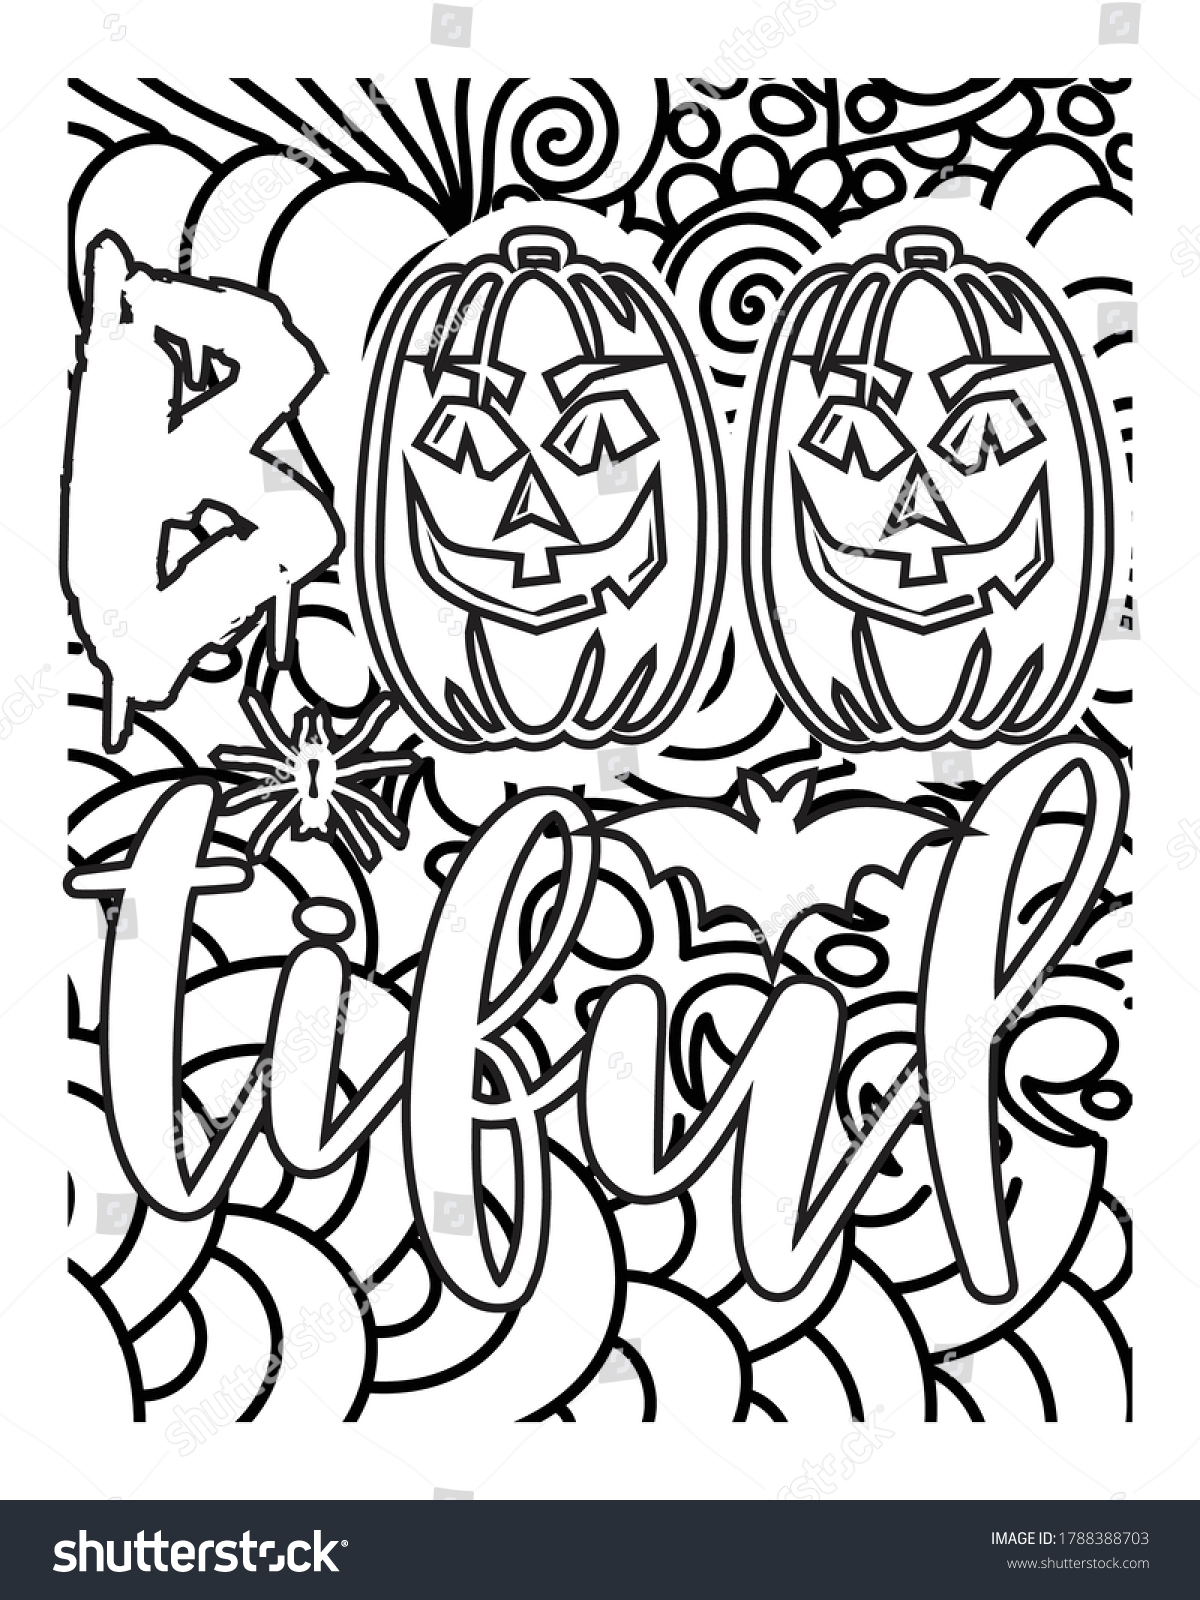 Scary coloring pages best coloring pages for kids Images, Stock ...